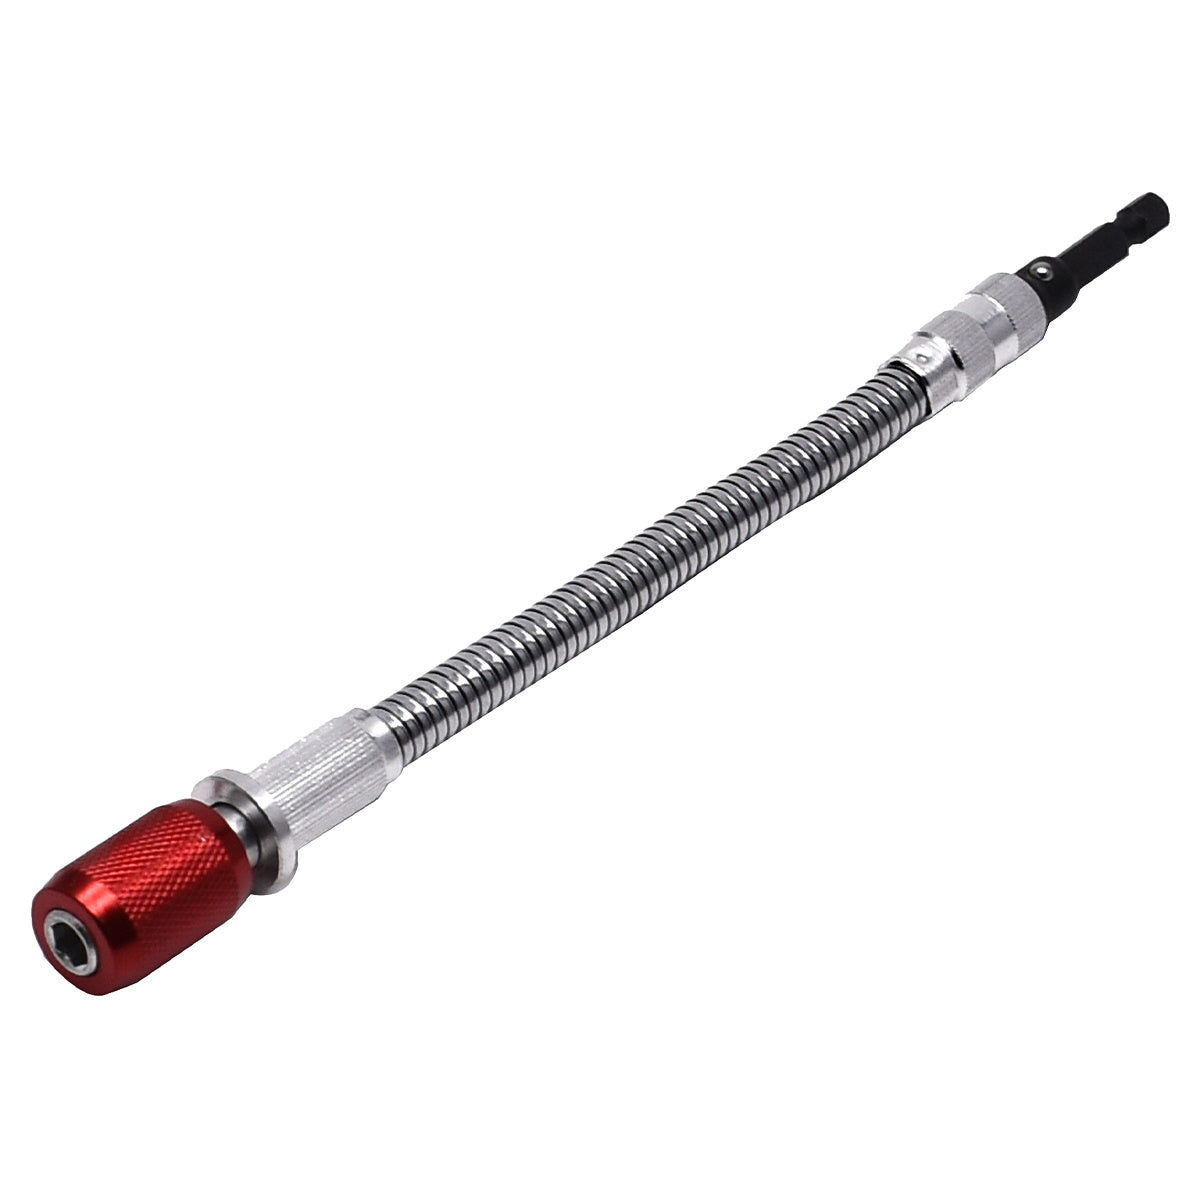 Amtech F0745 1/4″ Hex Quick Change 240 mm Flexible Drive - Premium Sundry Power Tools from DK Tools - Just $3.95! Shop now at W Hurst & Son (IW) Ltd